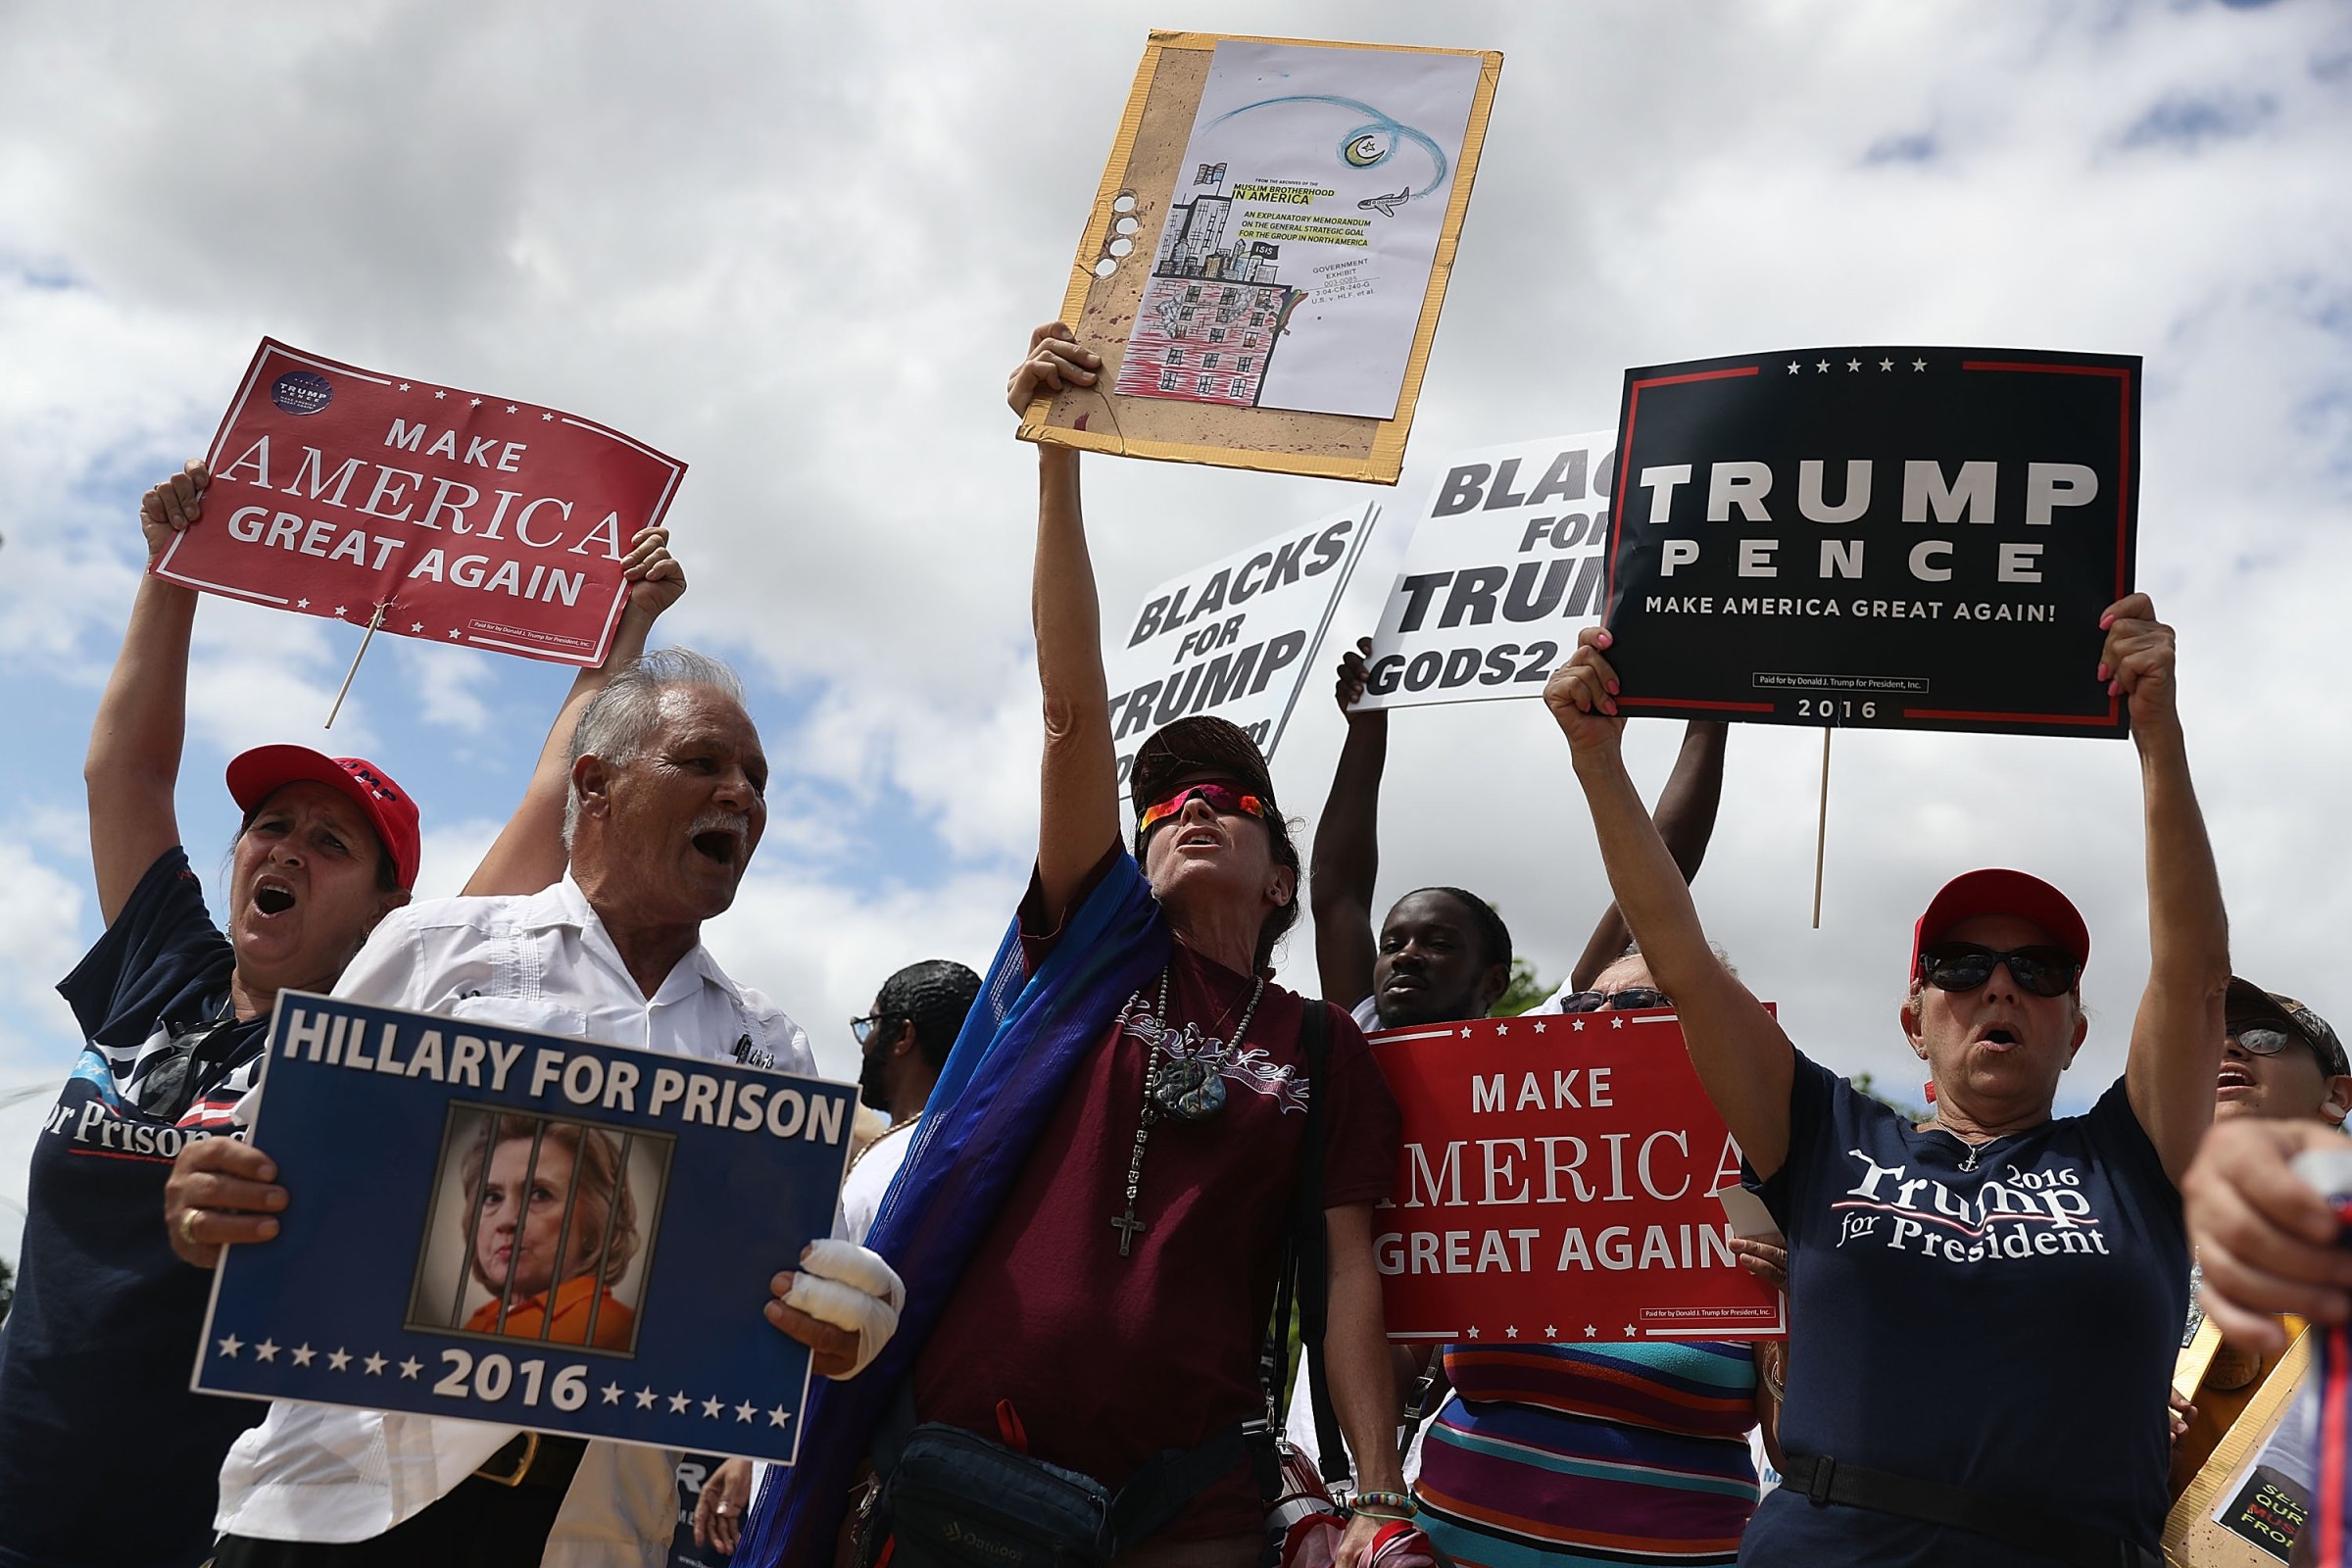 Supporters of Republican presidential nominee Donald Trump show their support for him before the start of the campaign event for Democratic presidential nominee Hillary Clinton at the Miami Dade College - Kendall Campus, Theodore Gibson Center on October 11, 2016 in Miami, Florida.